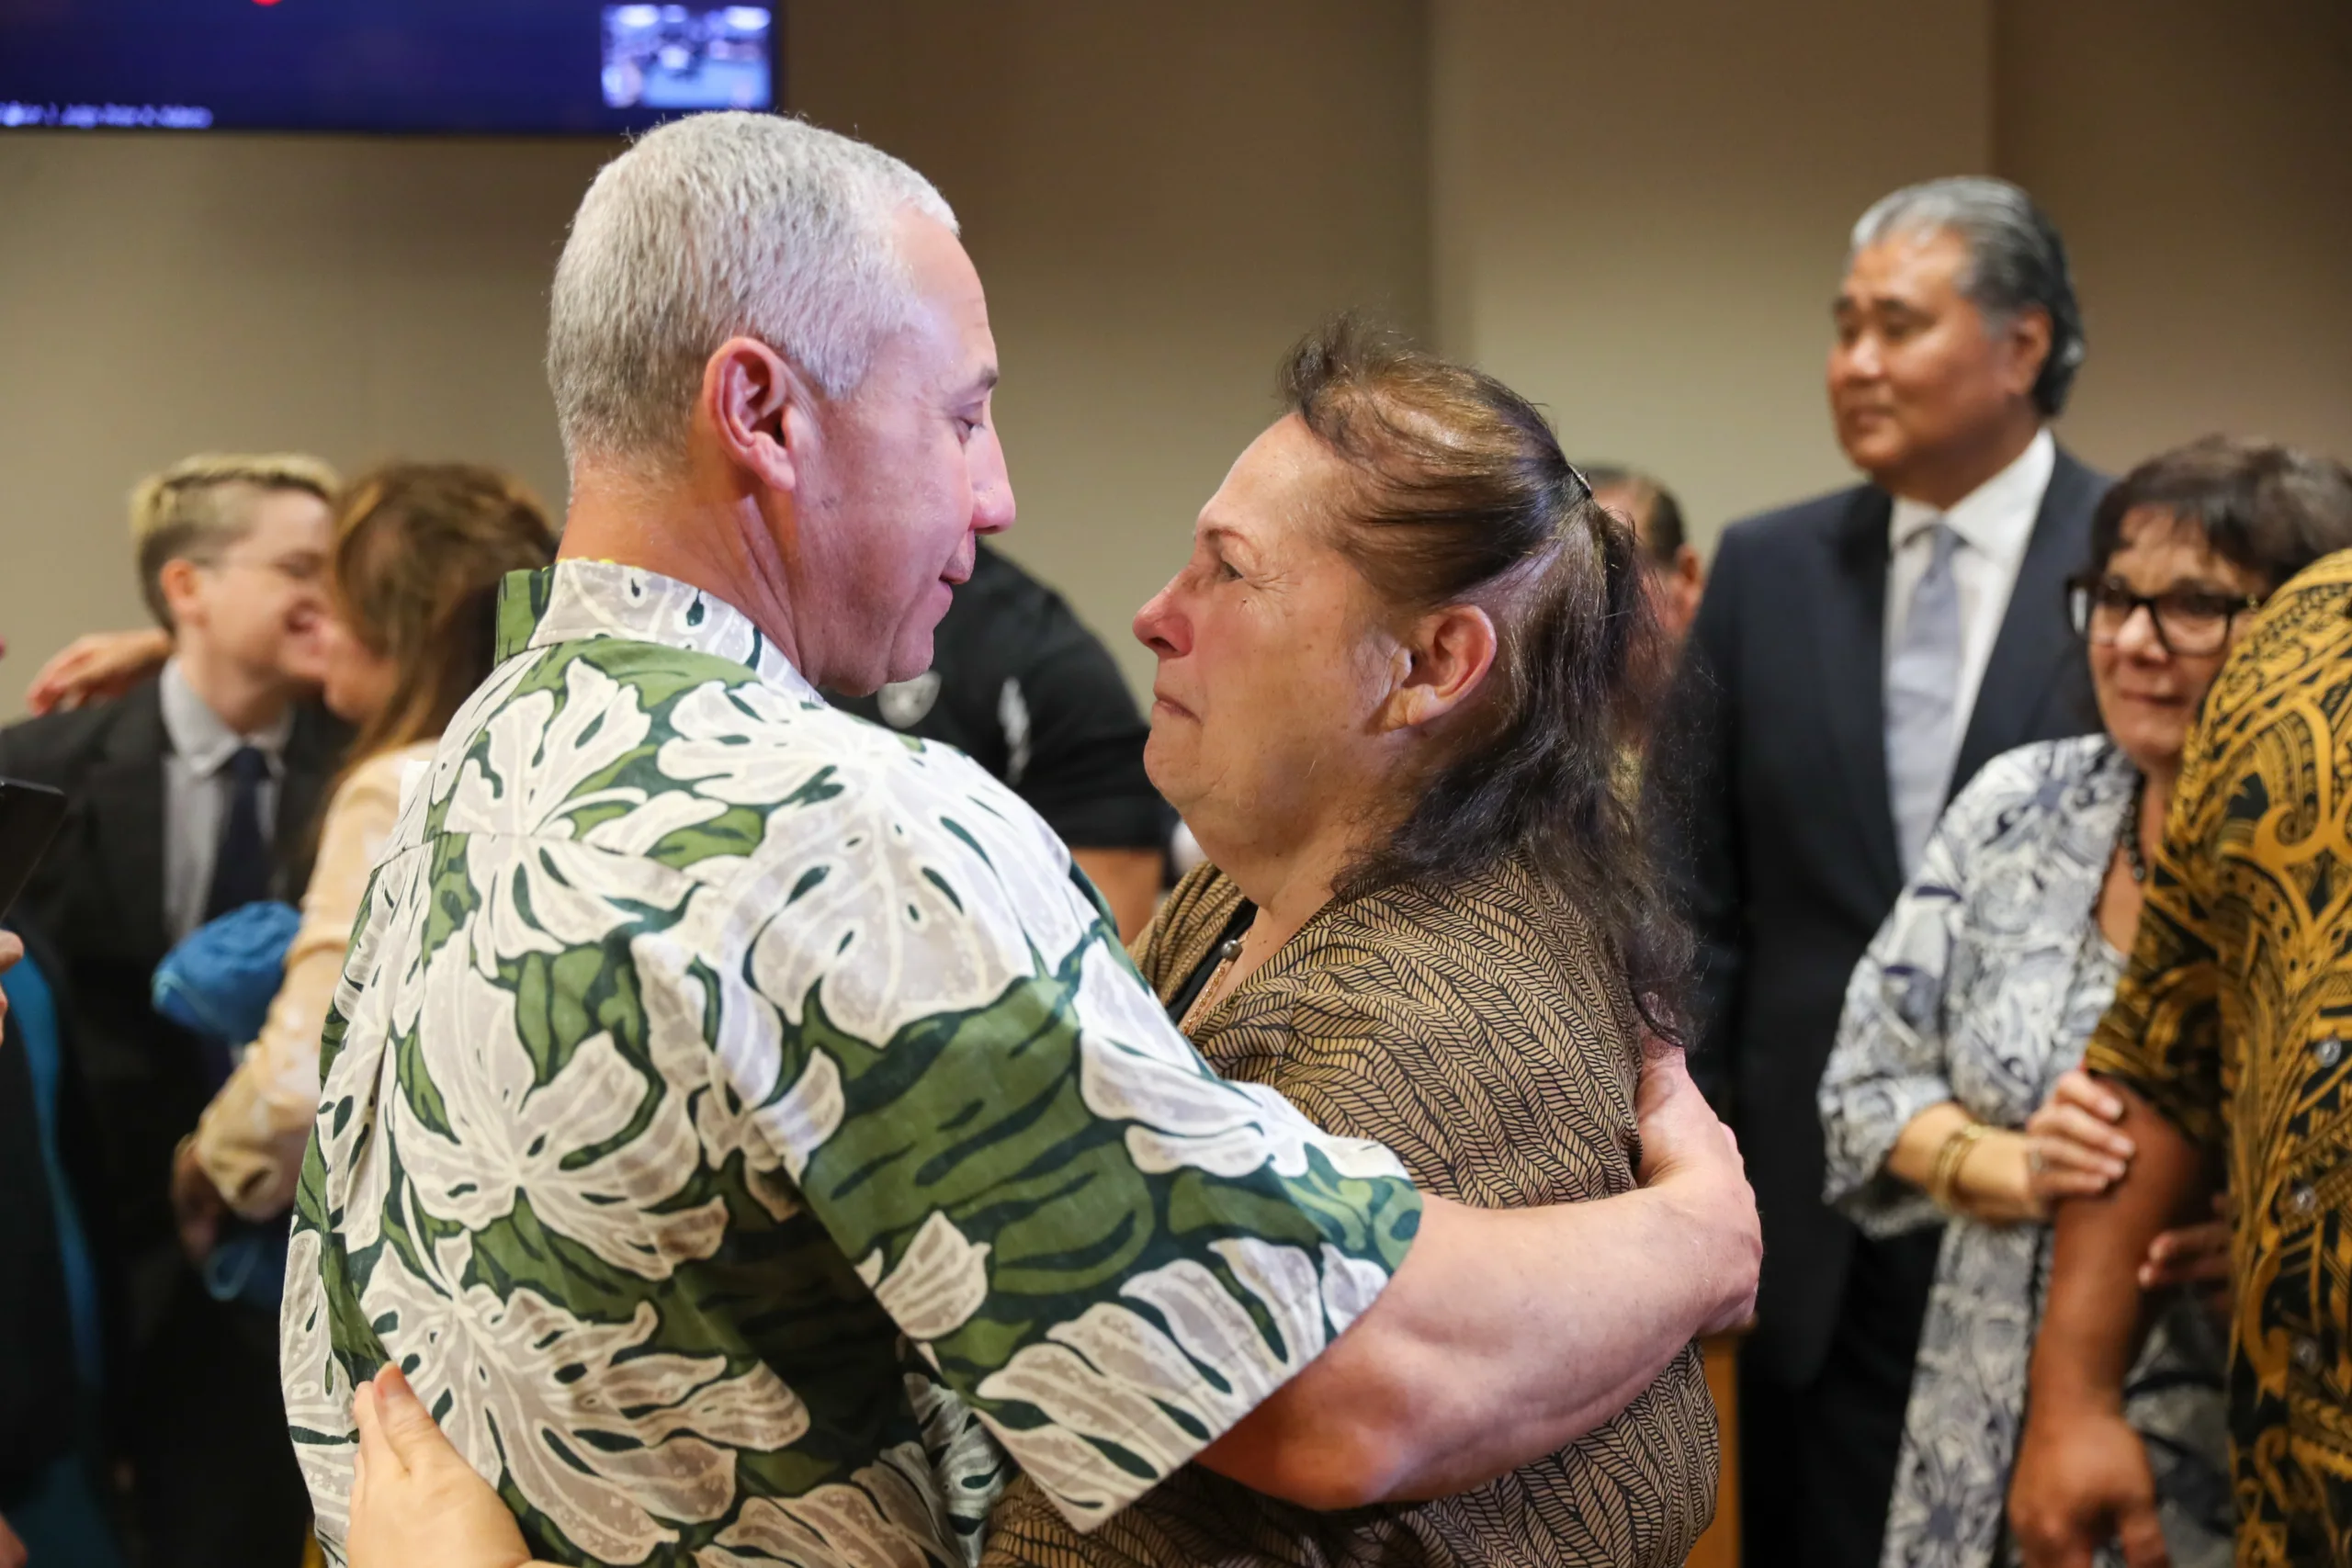 Ian Schweitzer embraces his mother, Linda, following his exoneration in Hilo, Hawaii, on Jan. 24, 2023. (Image: Marco Garcia/Innocence Project)